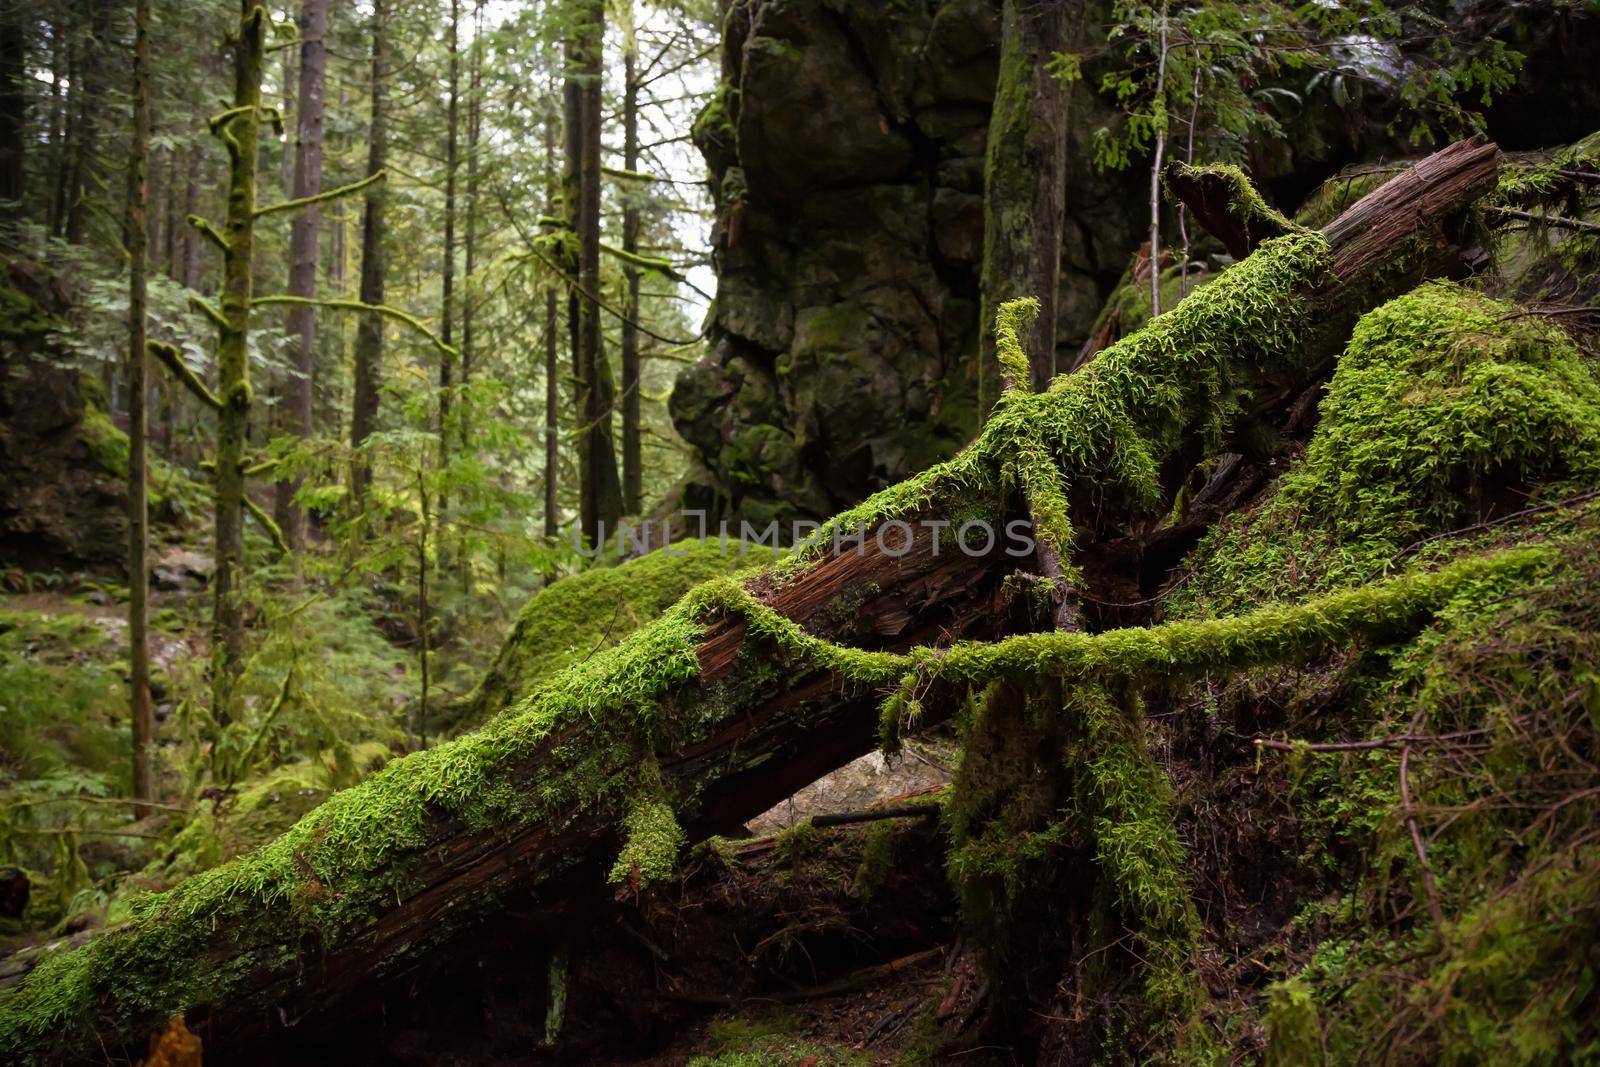 Beautiful forest scenery in Lynn Valley Canyon. Taken in North Vancouver, British Columbia, Canada.